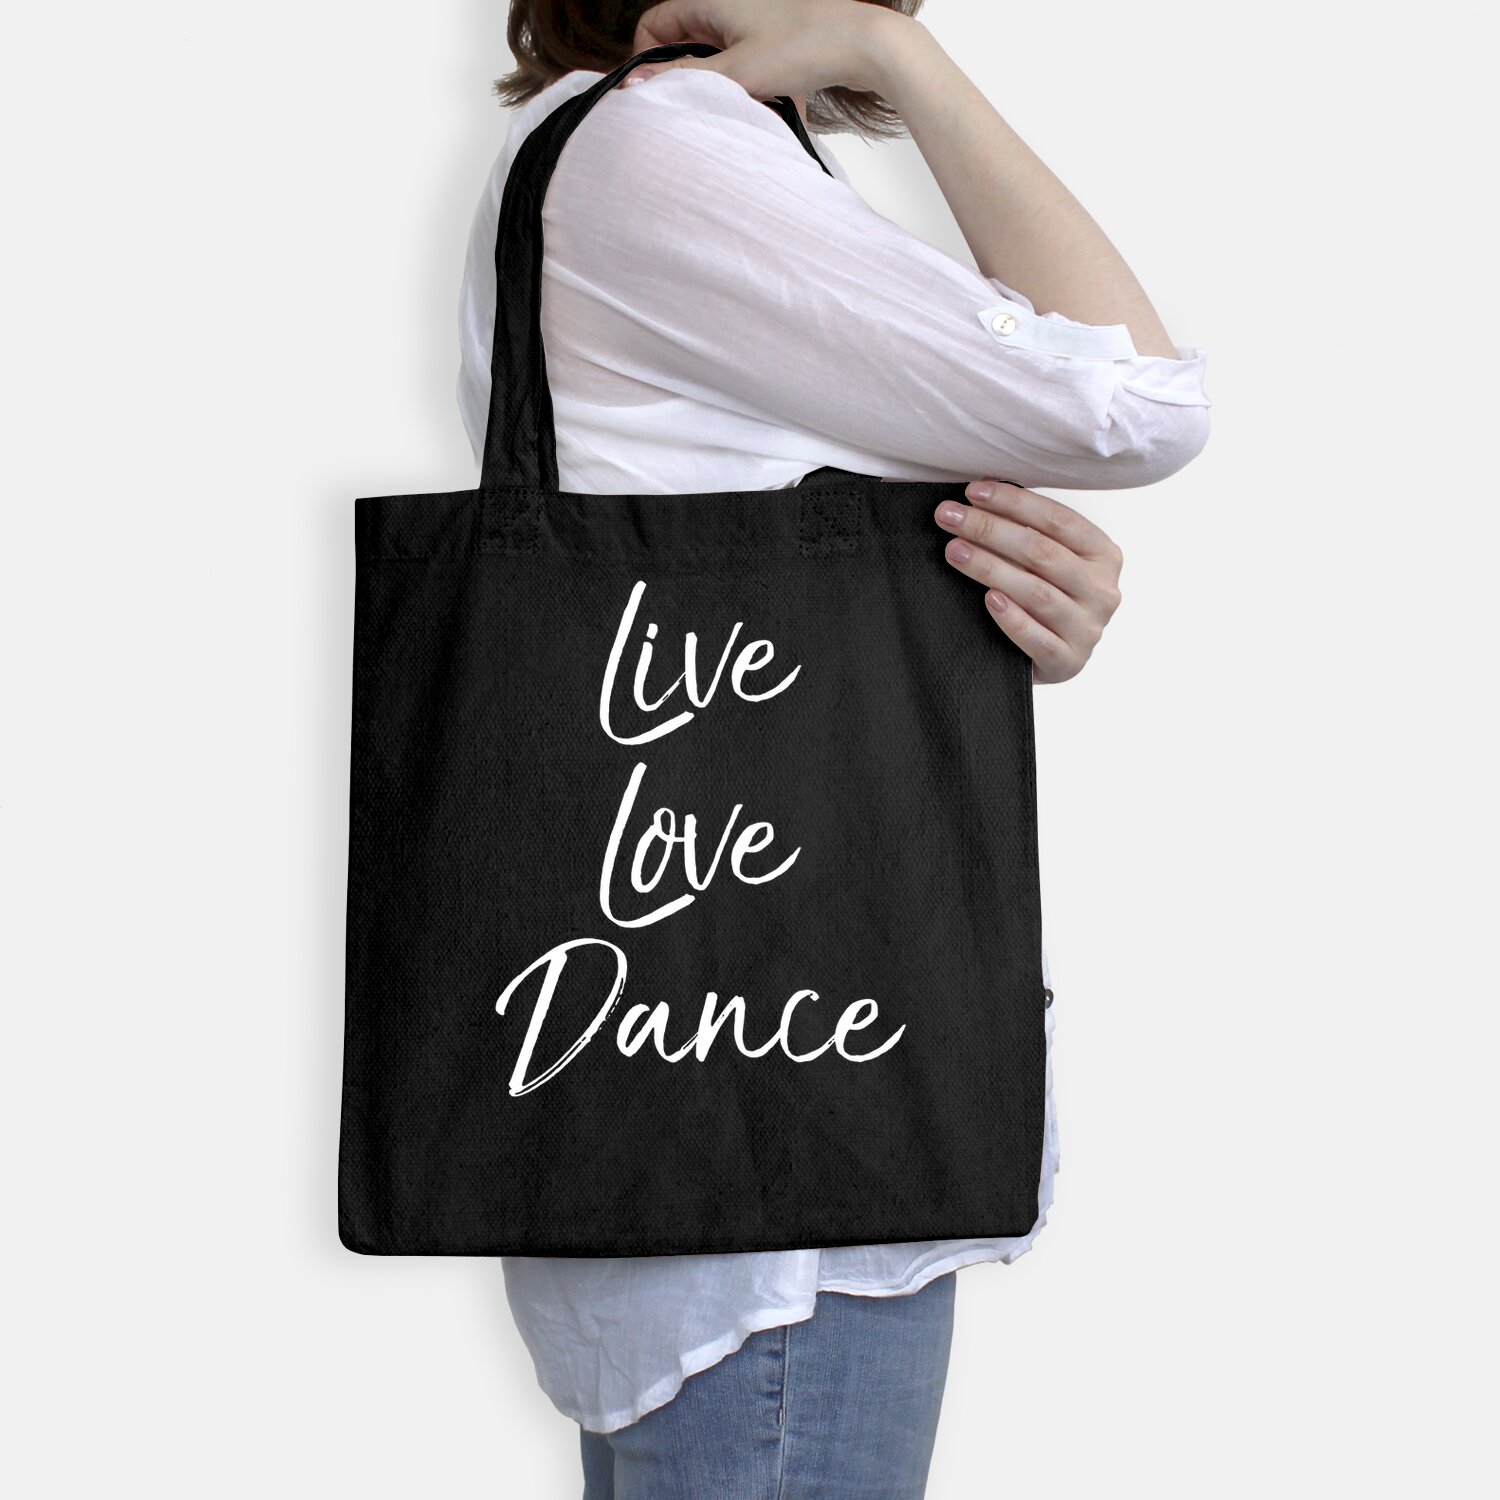 Dancing Quote for Dancers Tote Bag